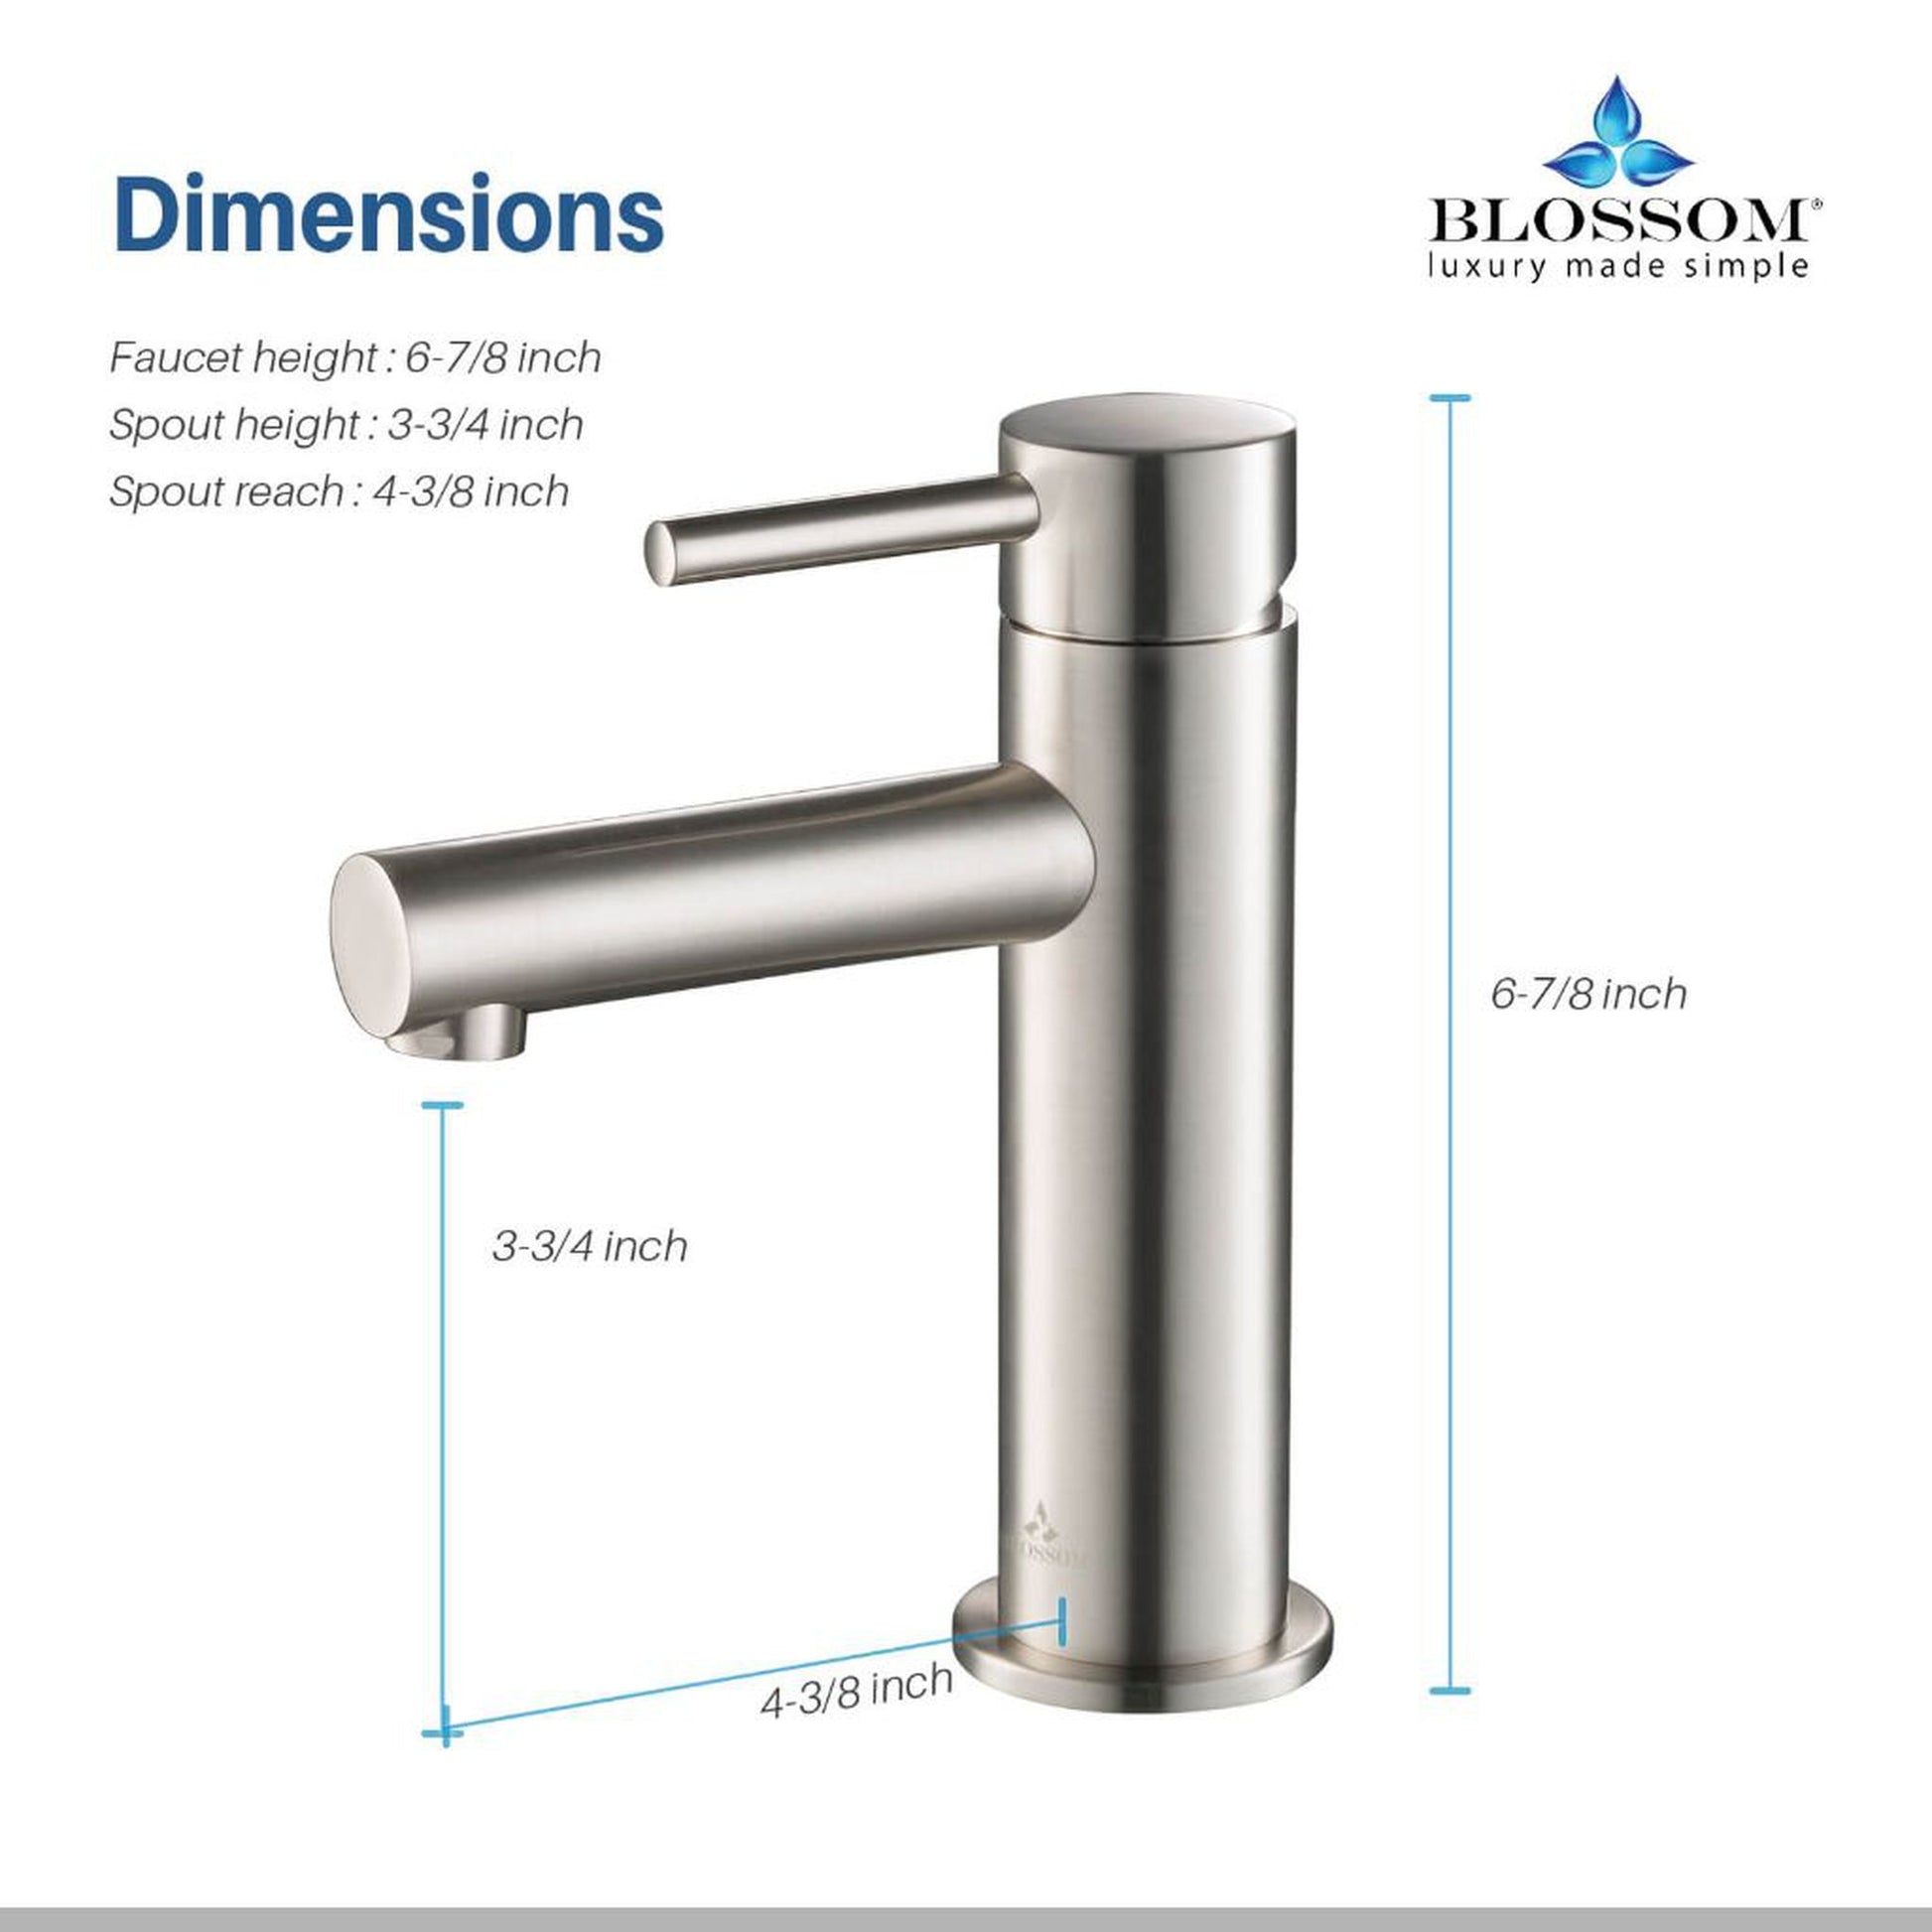 Blossom F01 116 4" x 7" Brushed Nickel Lever Handle Bathroom Sink Single Hole Faucet